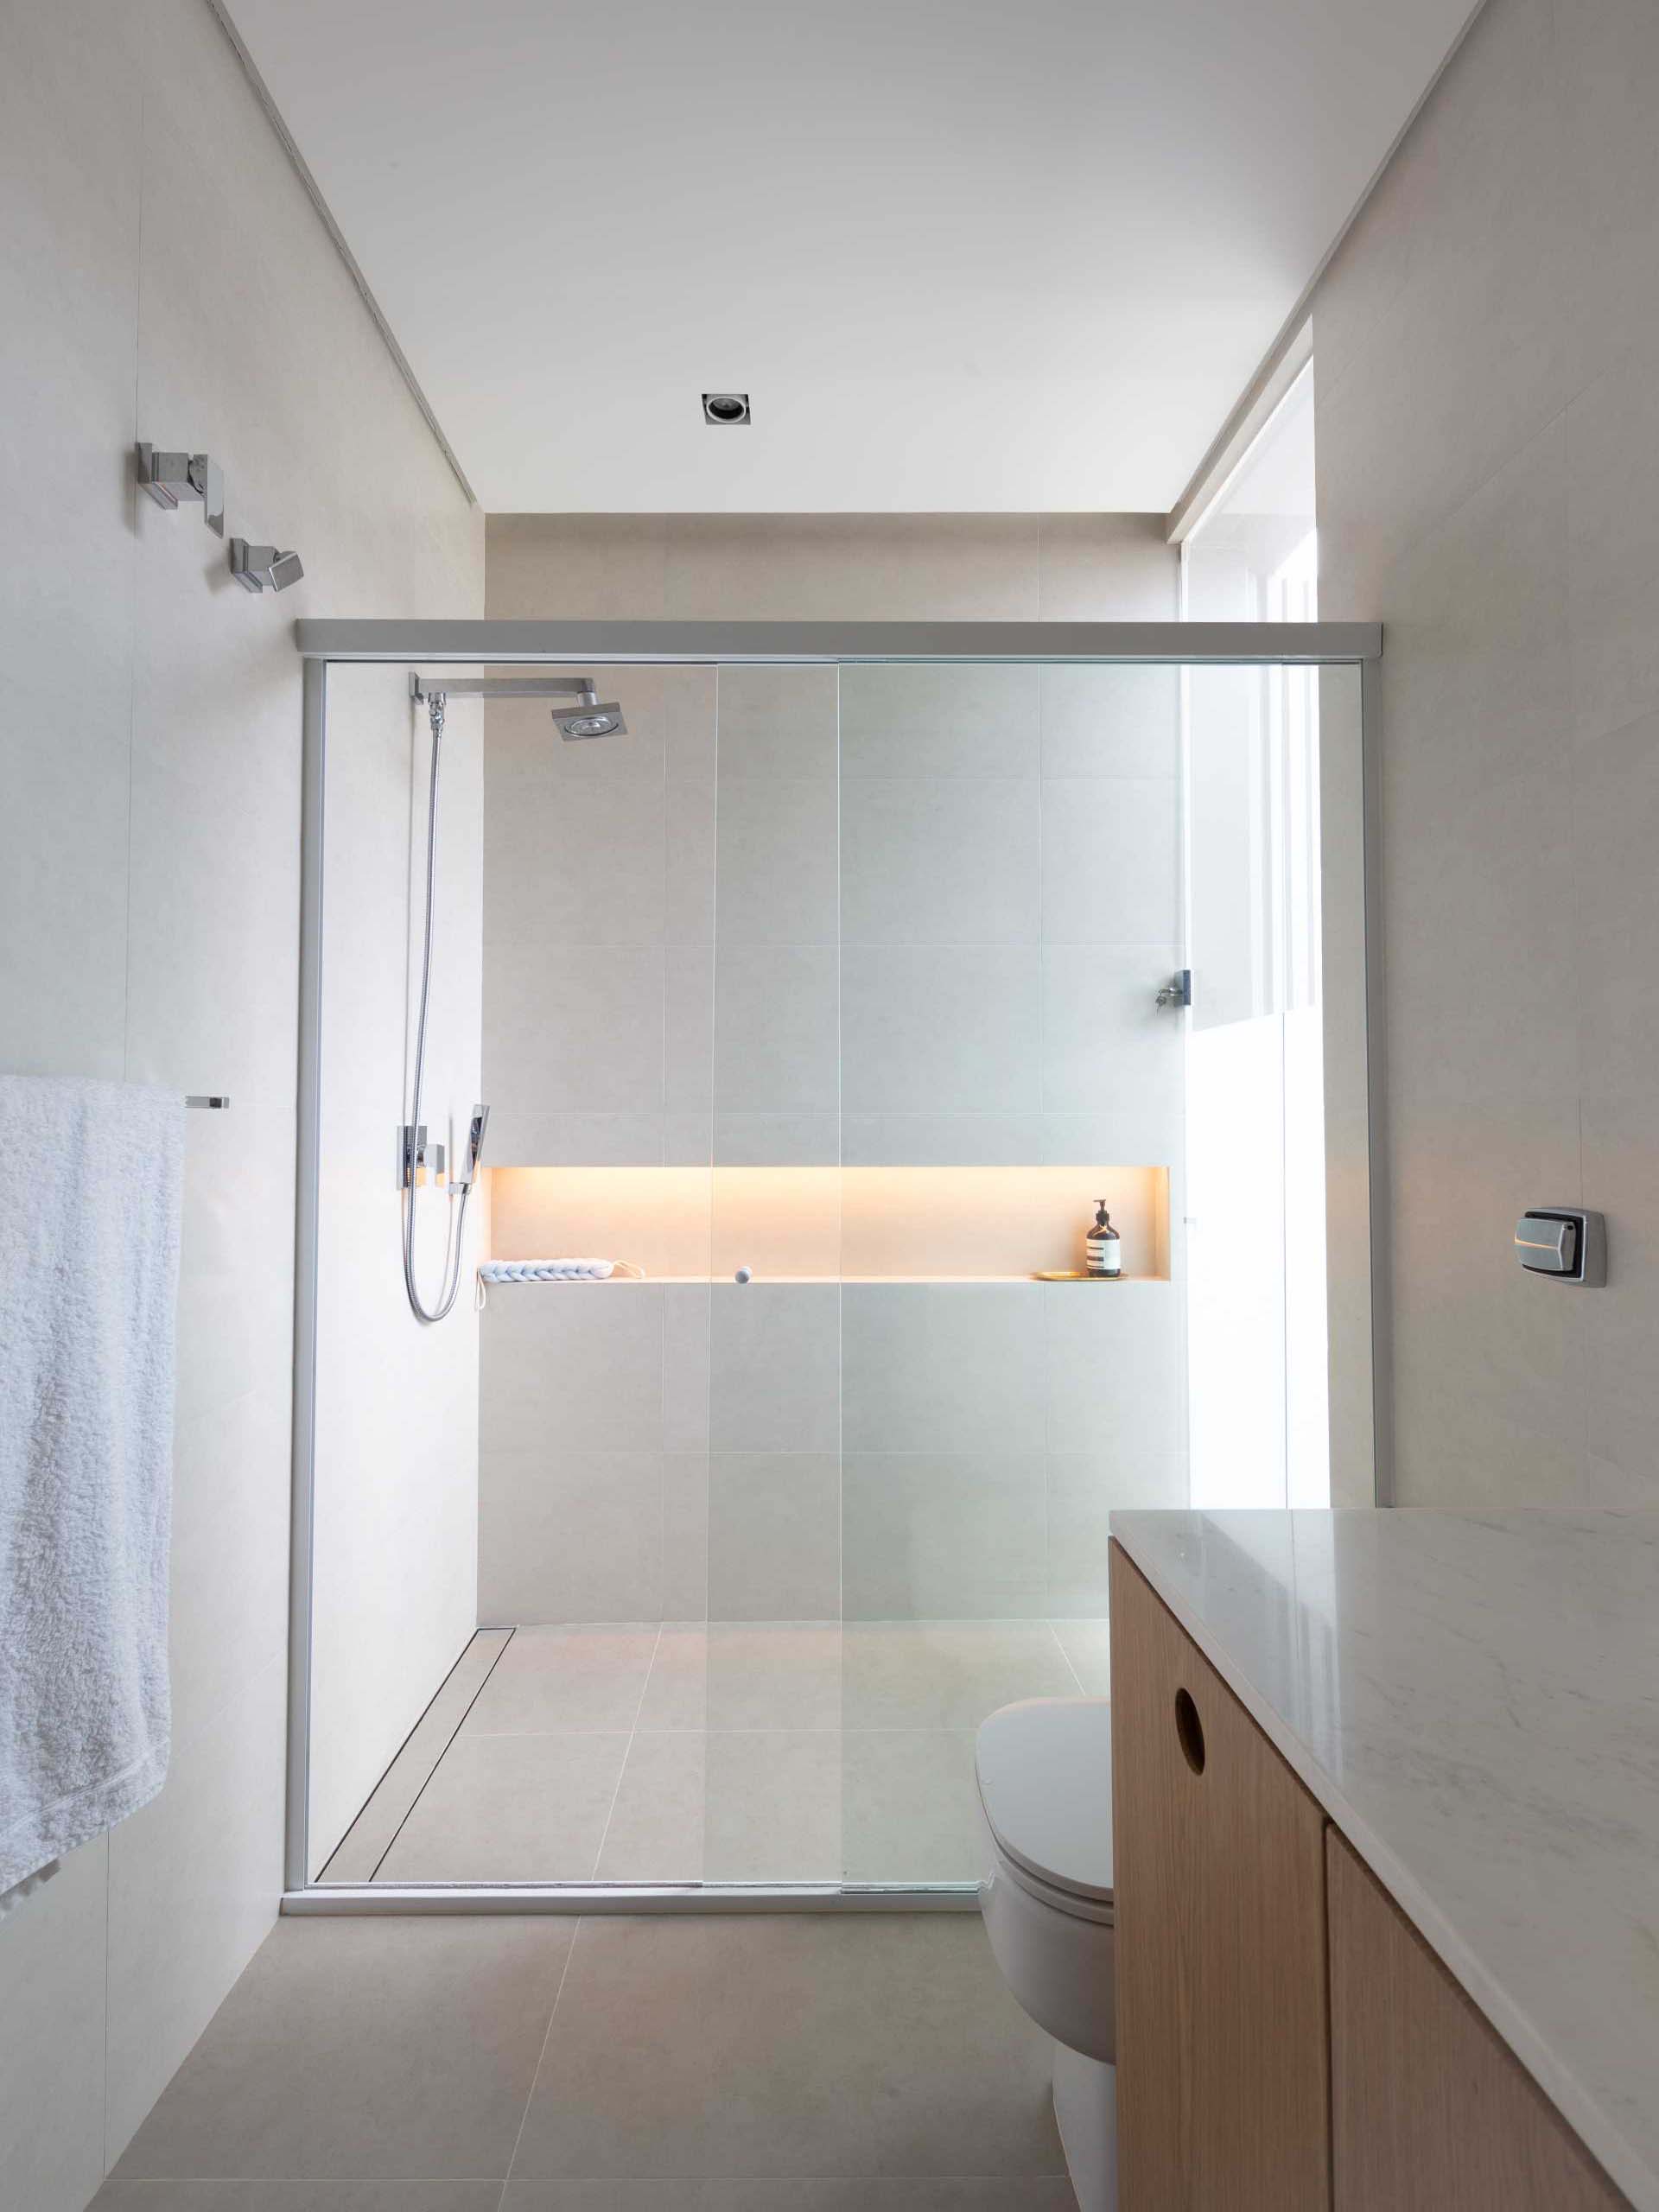 In this modern bathroom, there's a shower with a shelving niche that includes hidden lighting.